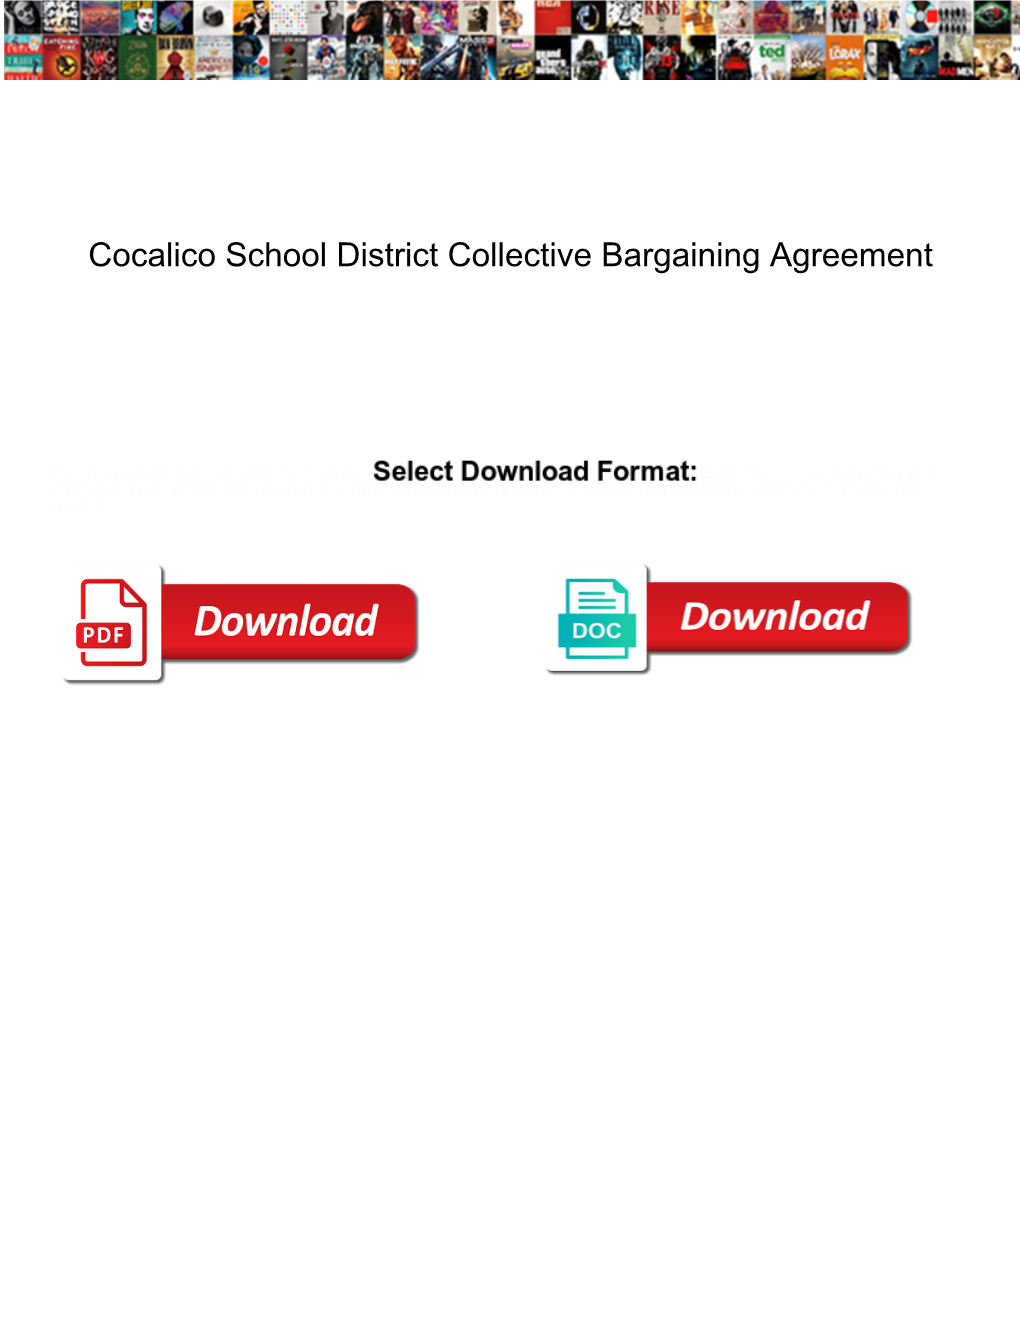 Cocalico School District Collective Bargaining Agreement